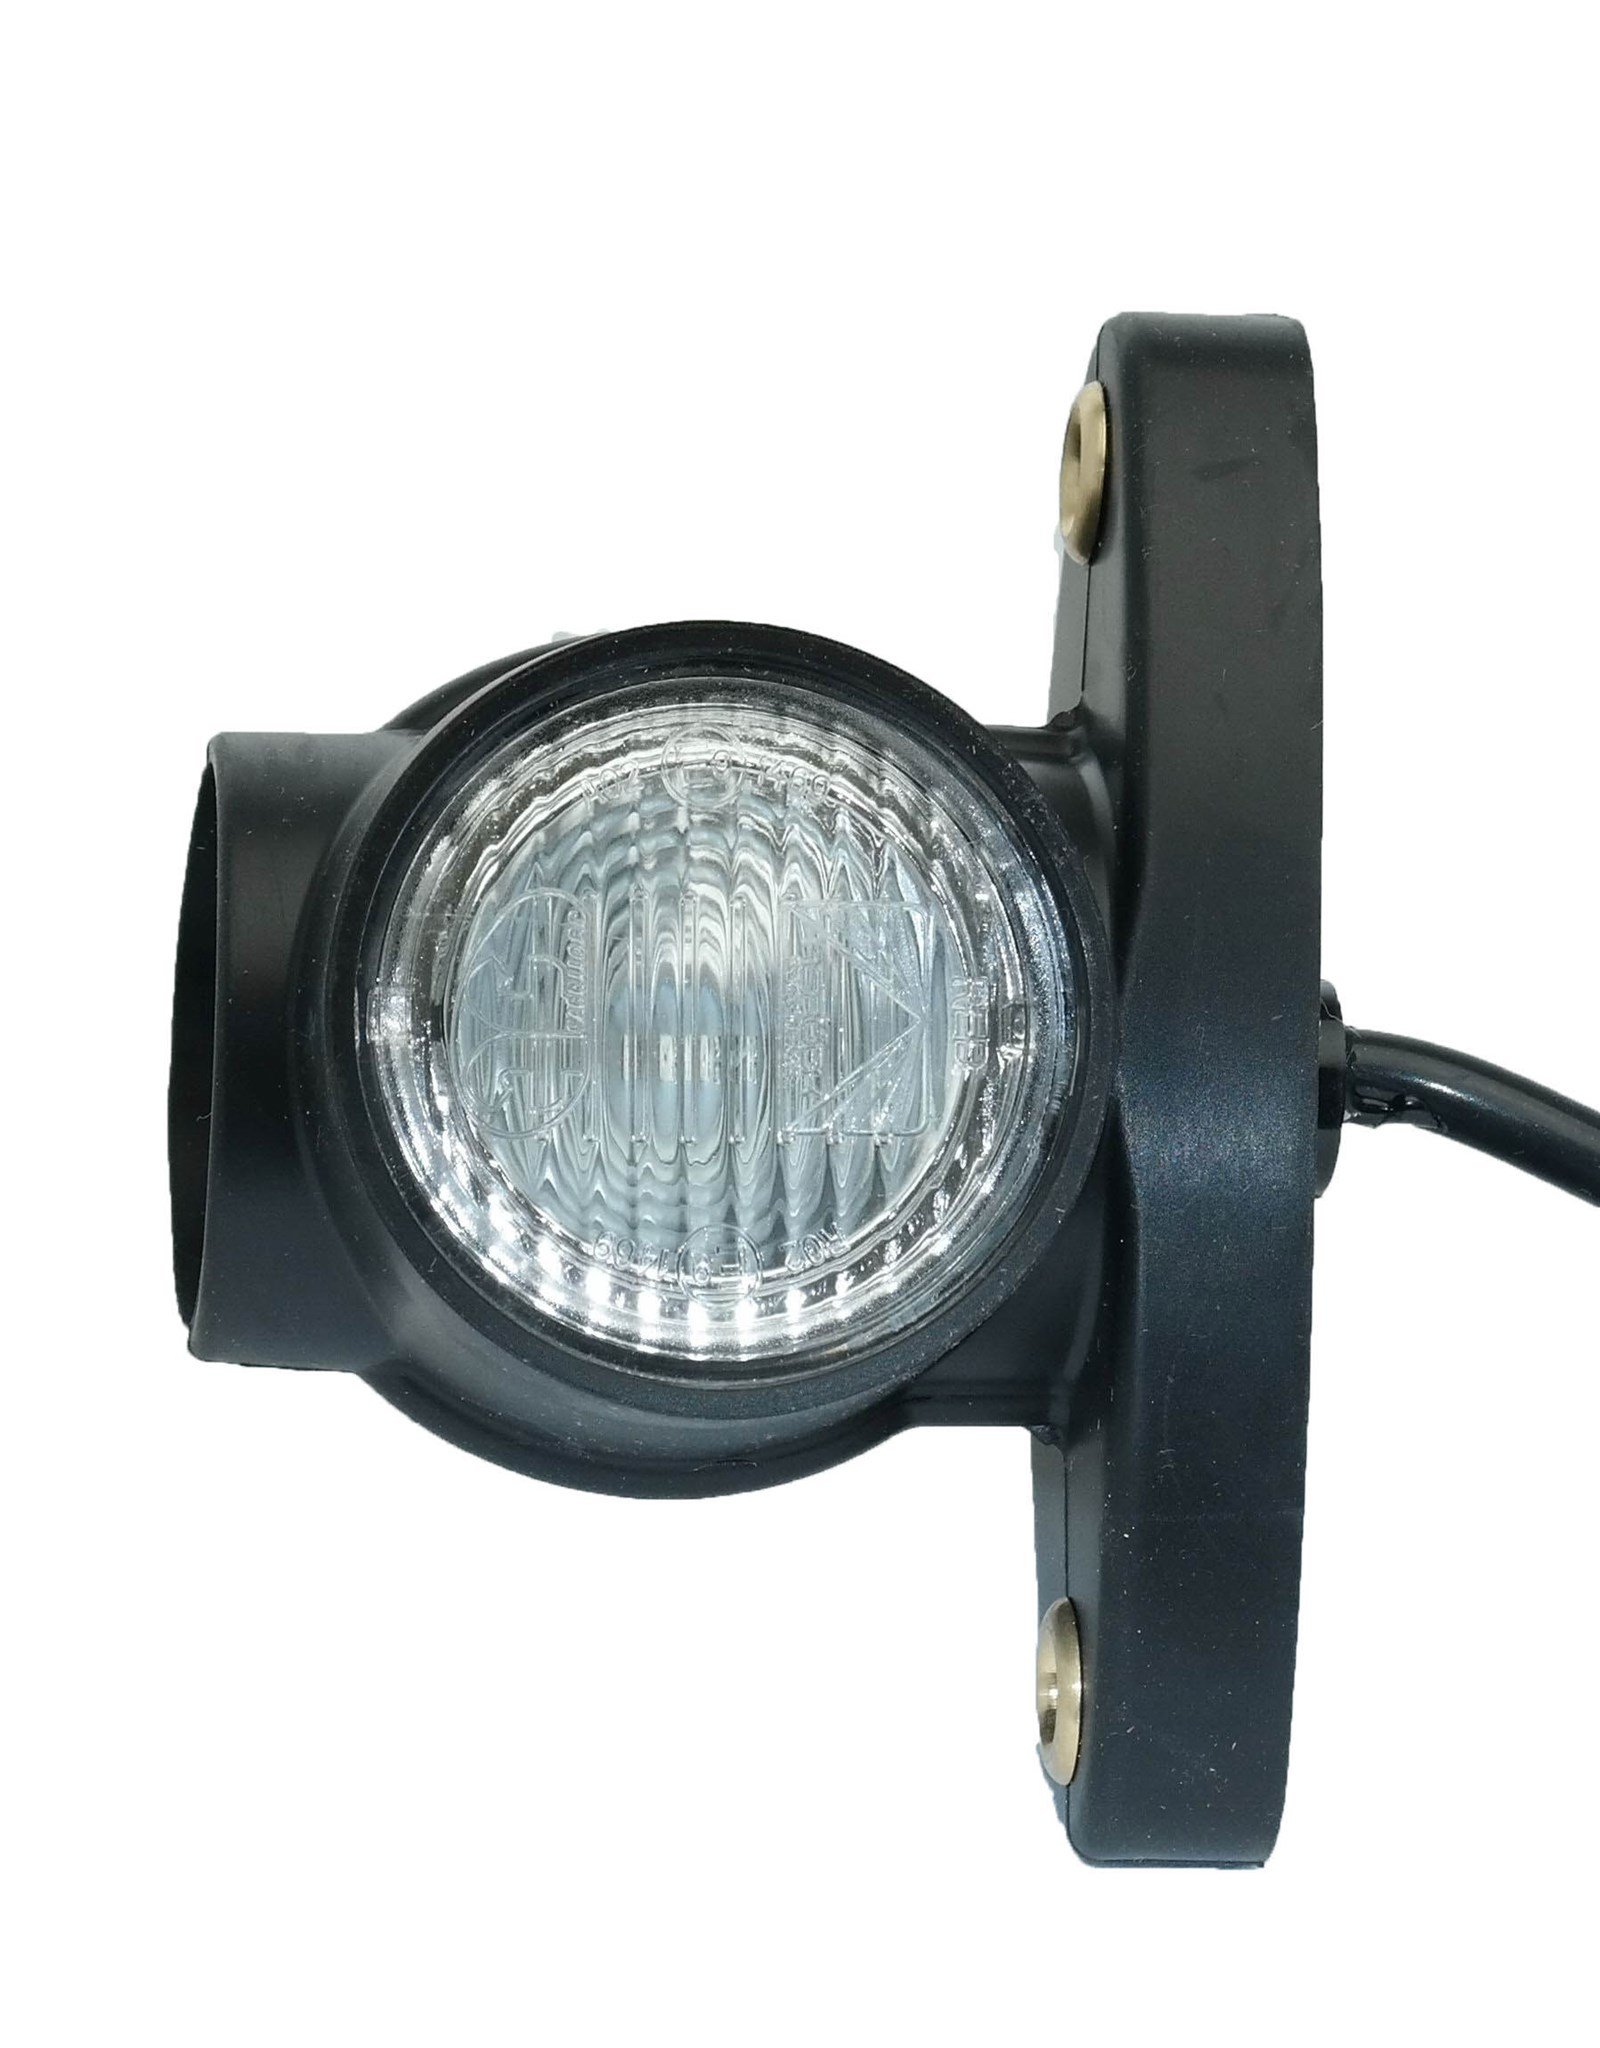 Picture of Umrissleuchte  Aspöck Superpoint III LED Direkt ASS3 3pol. 250mm ro/we/or